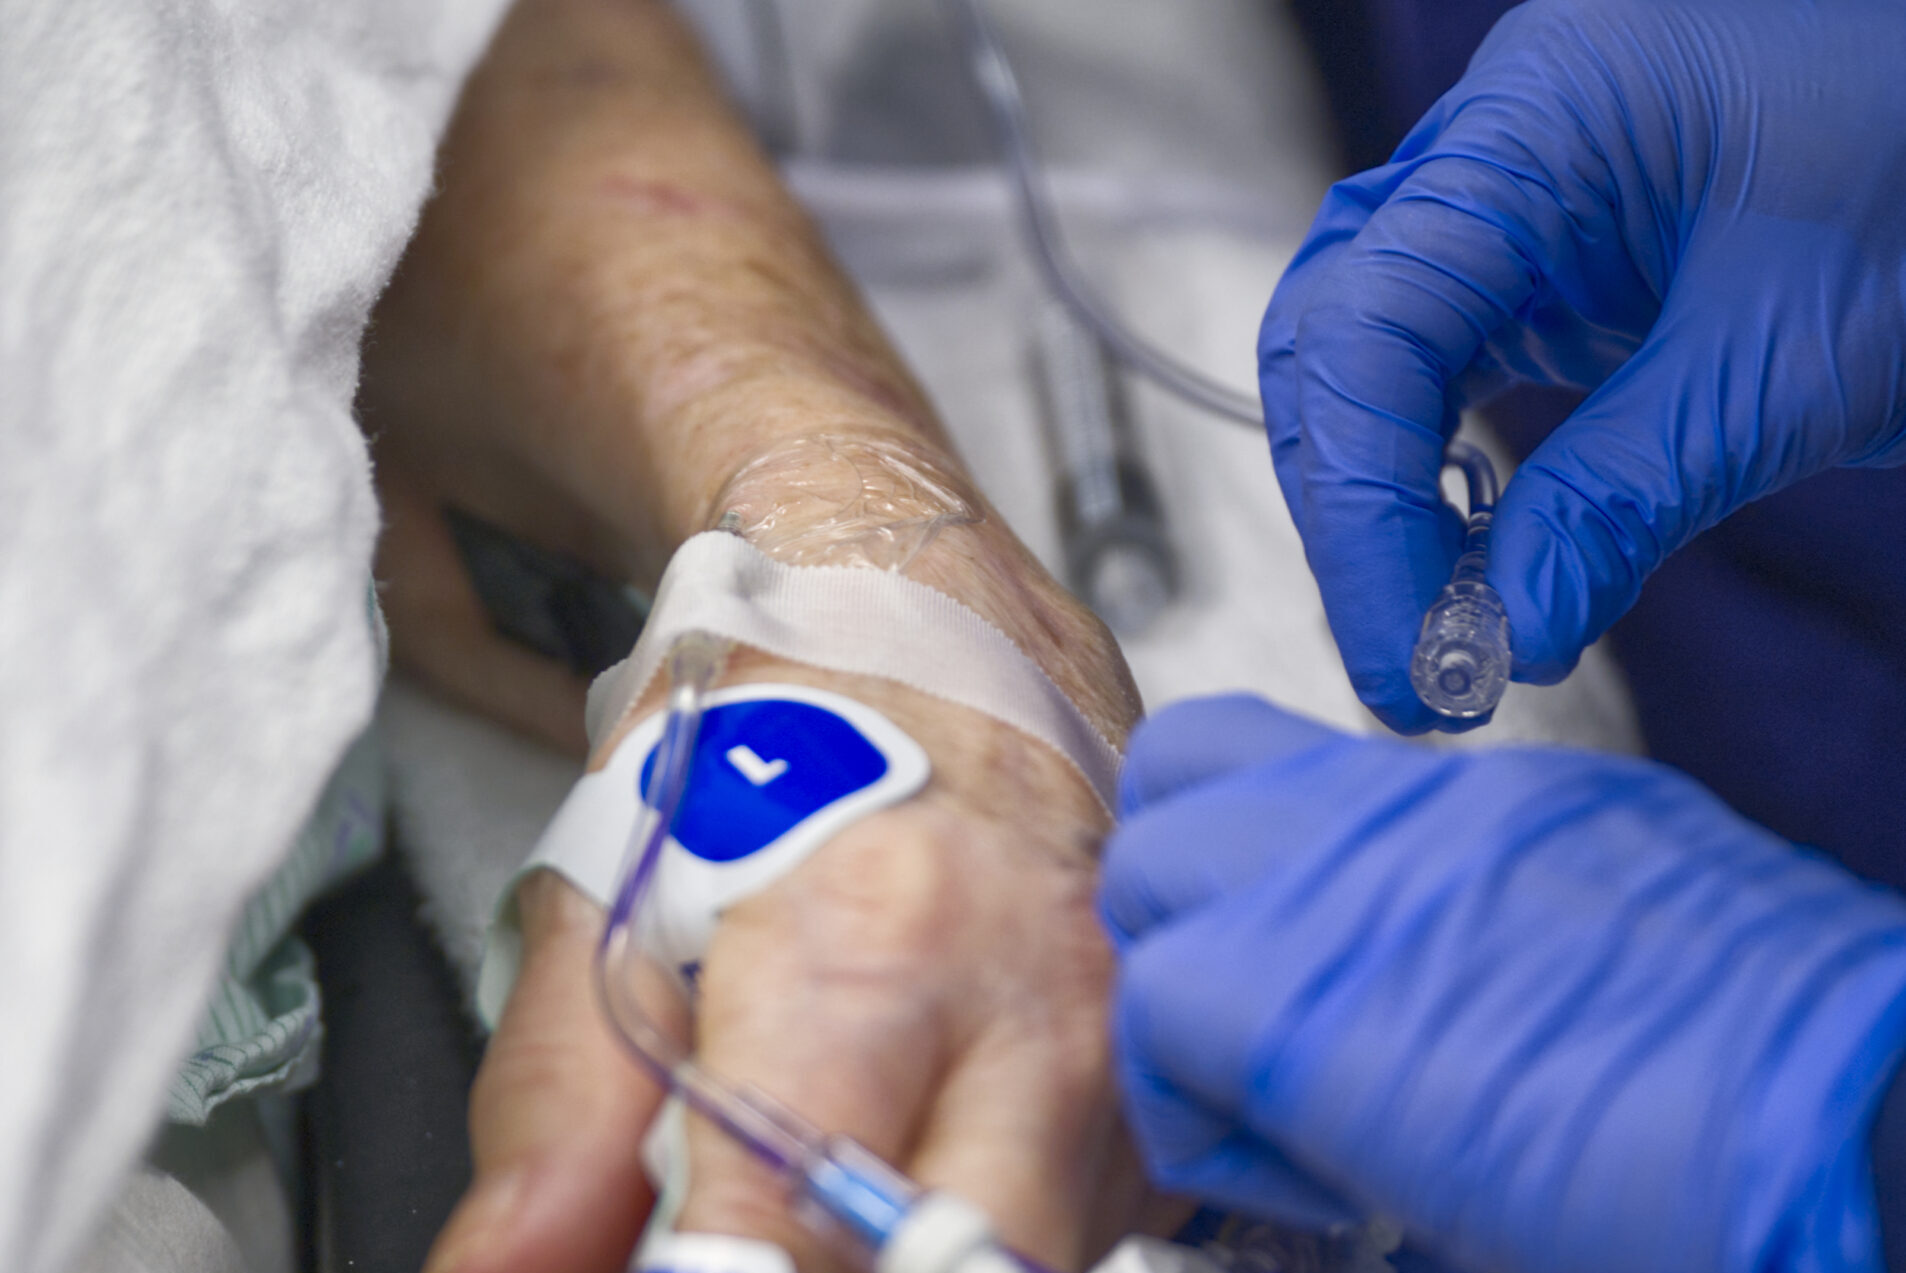 blue gloved hands attaching a catheter to a patient's wrist